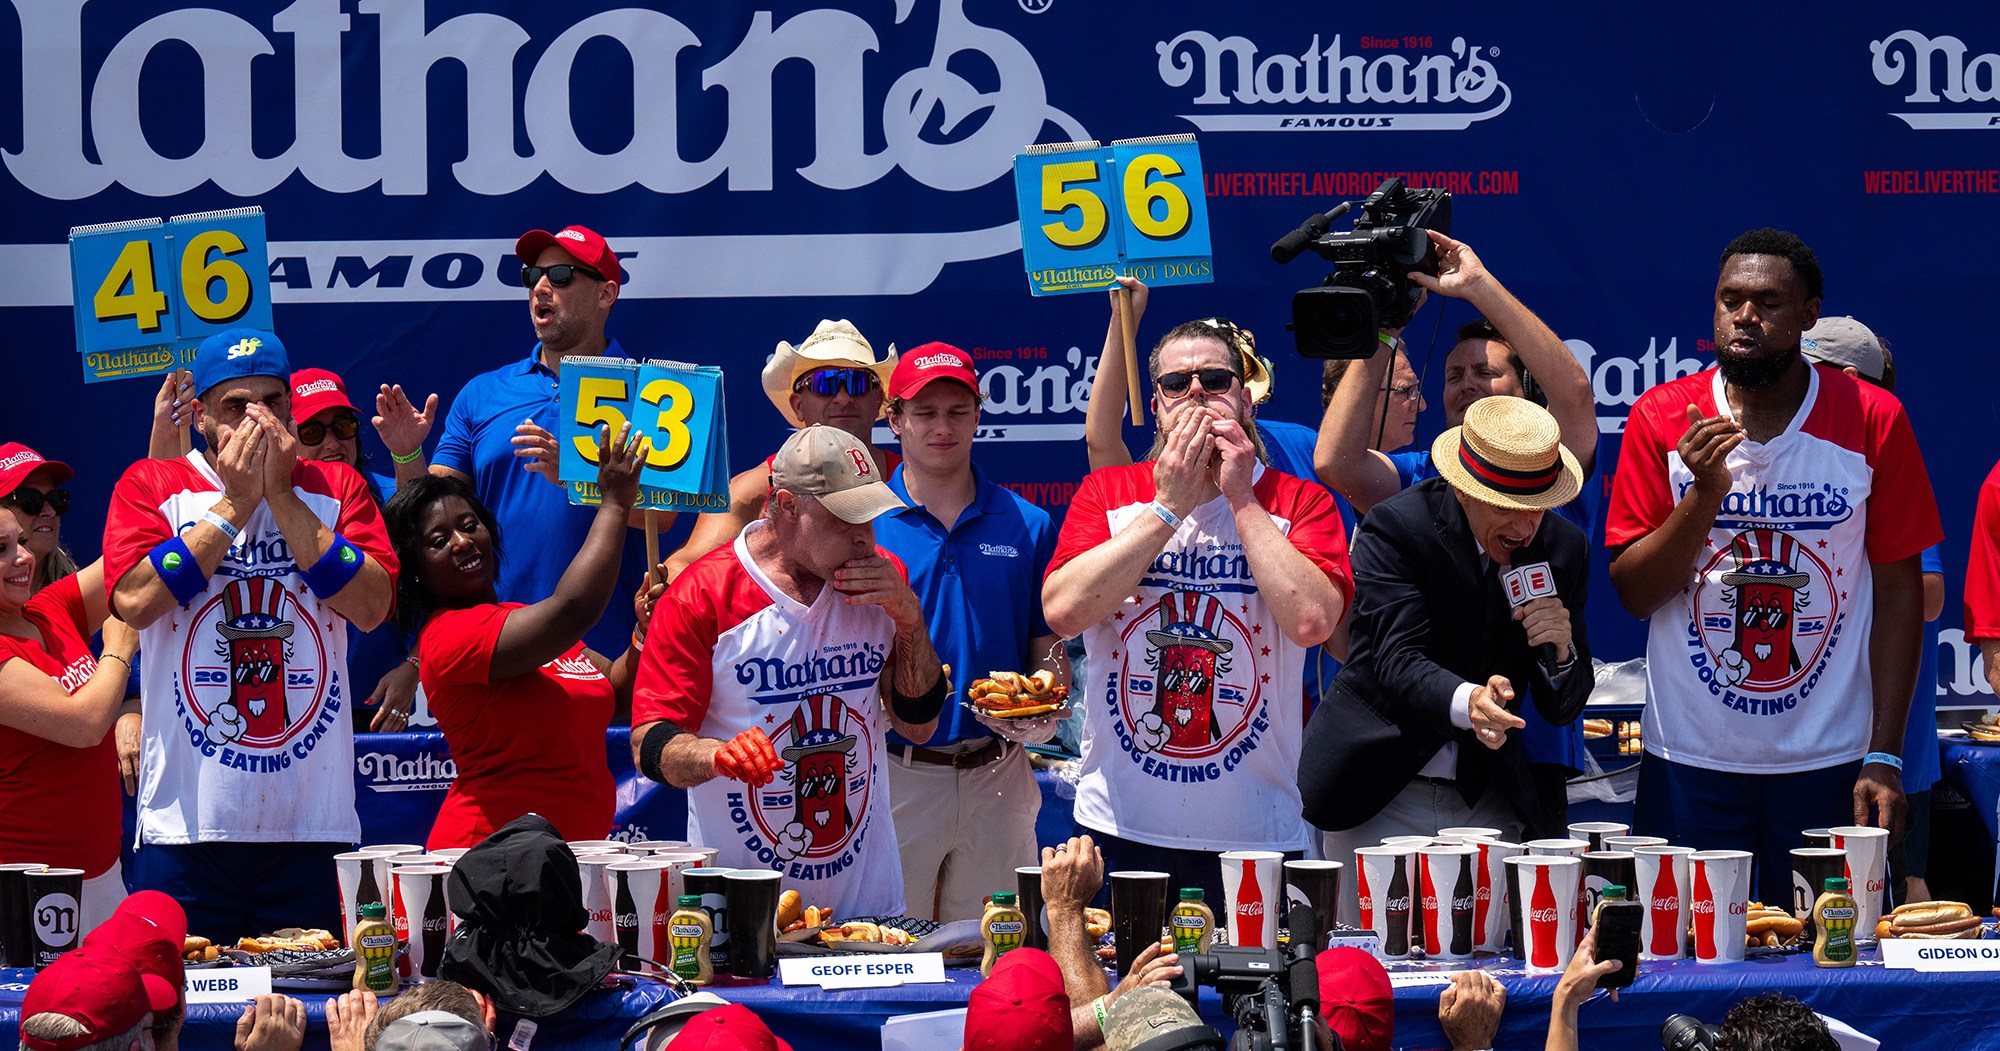 Patrick Bertoletti Devours Competition: The New Hot Dog Eating Champion!